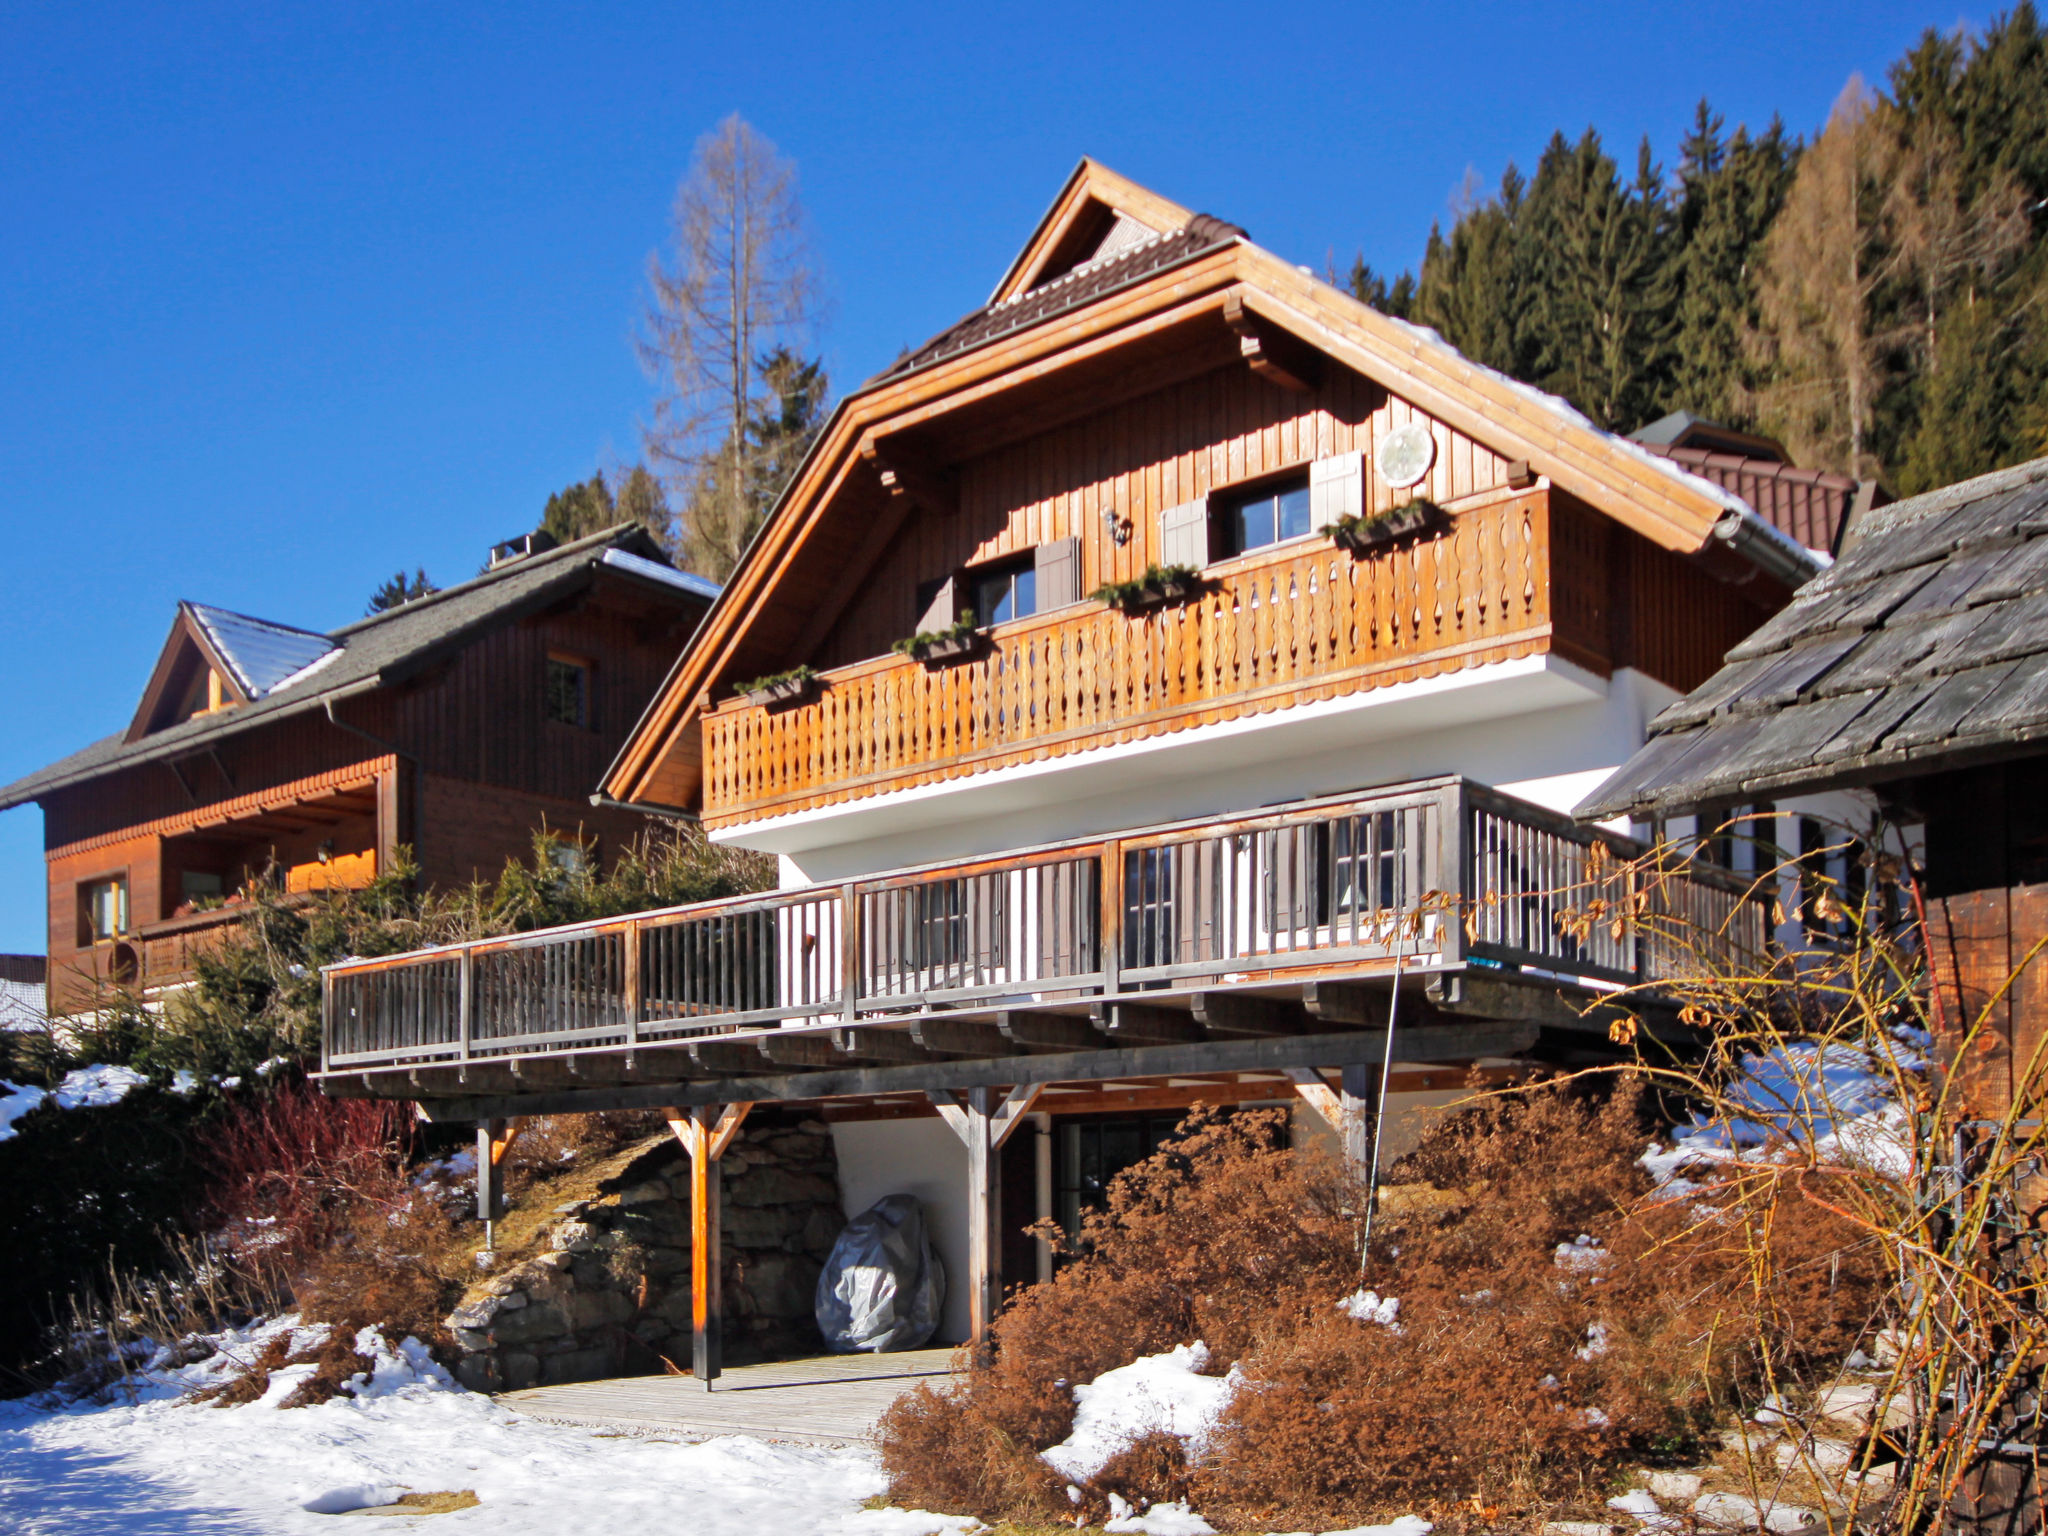 Schwalbe  with 3 bedrooms and 1.5 bathrooms - Bad Kleinkirchheim